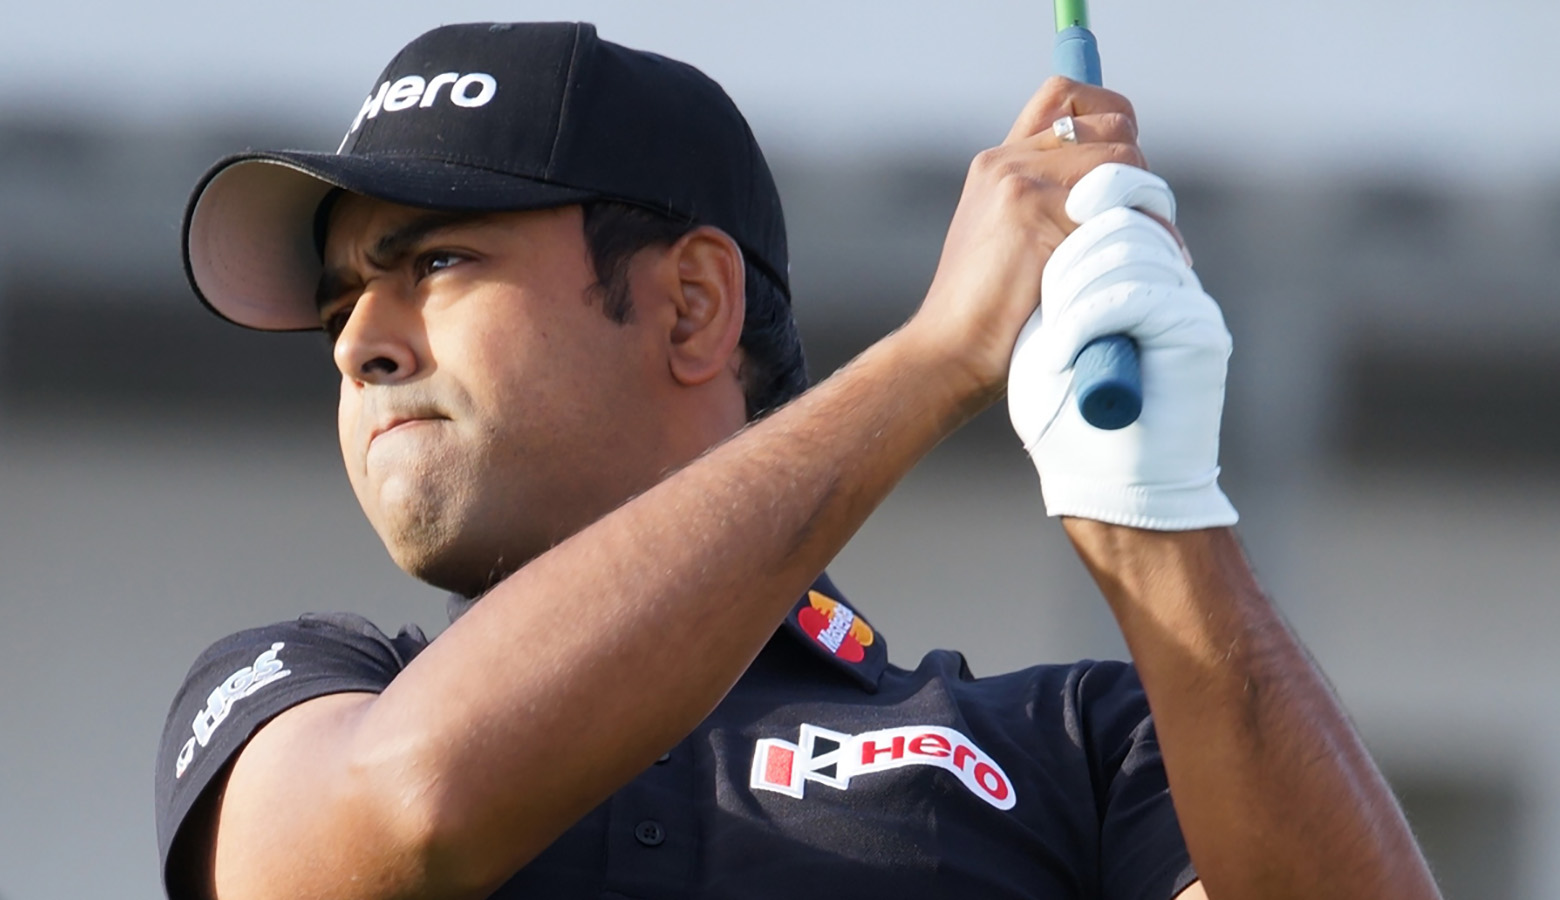 Lahiri misses small putts but shoots 69 to lie 32nd at John Deere Classic